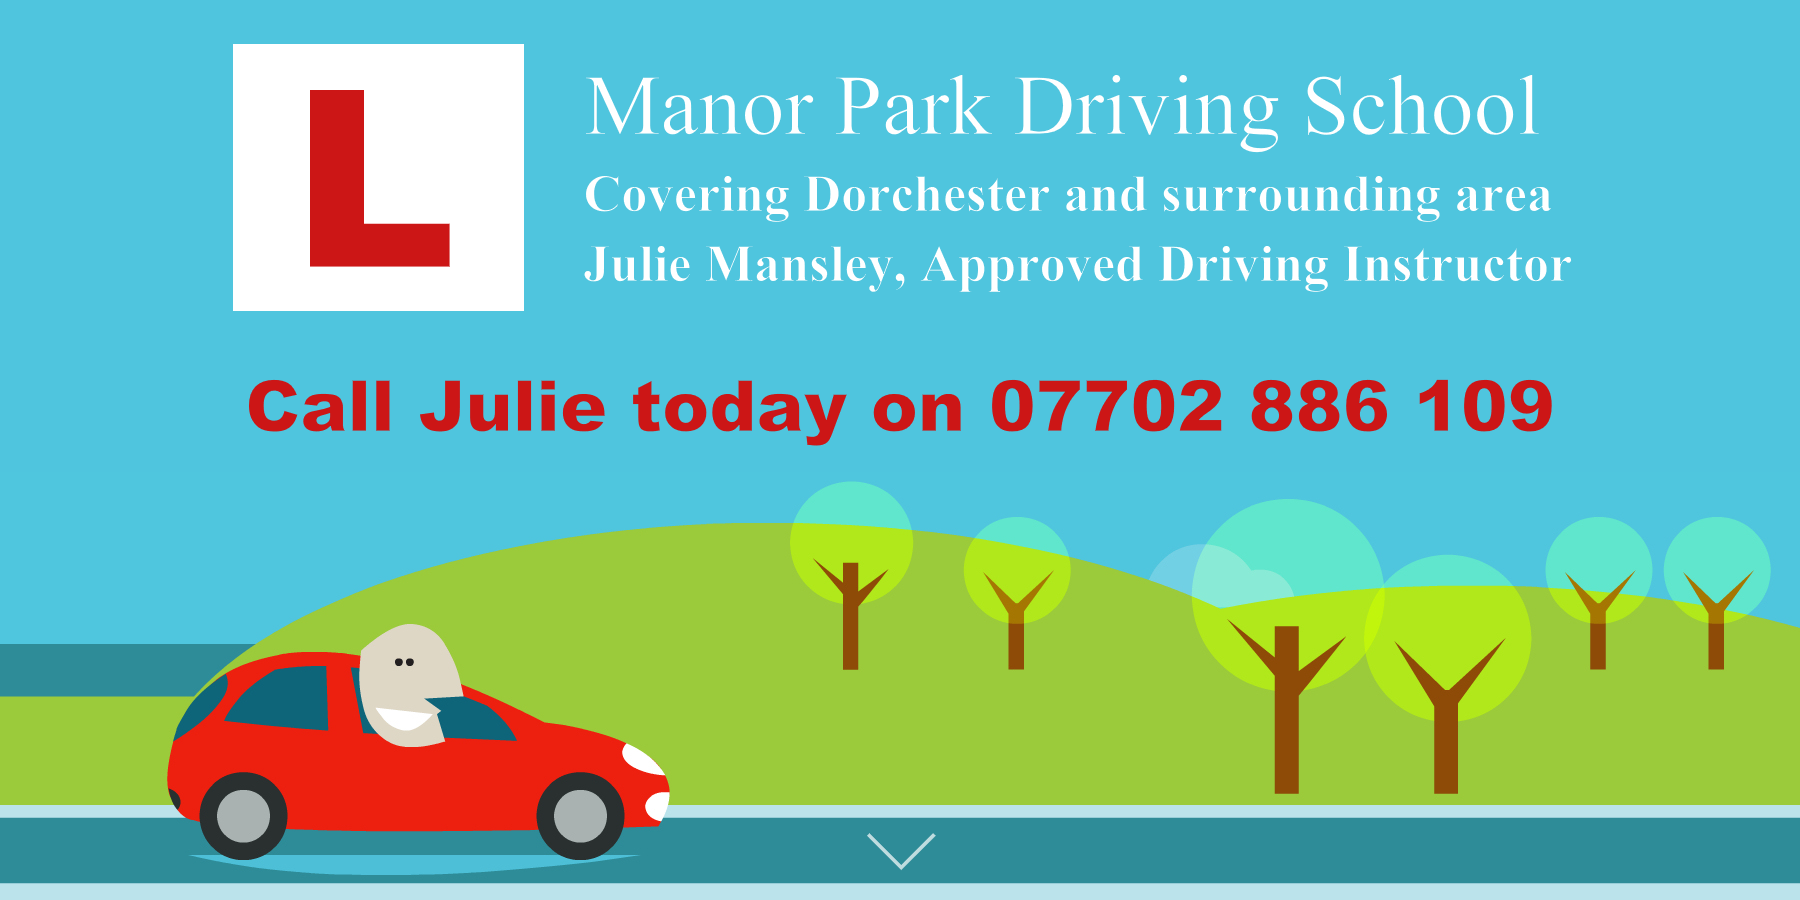 Manor Park Driving